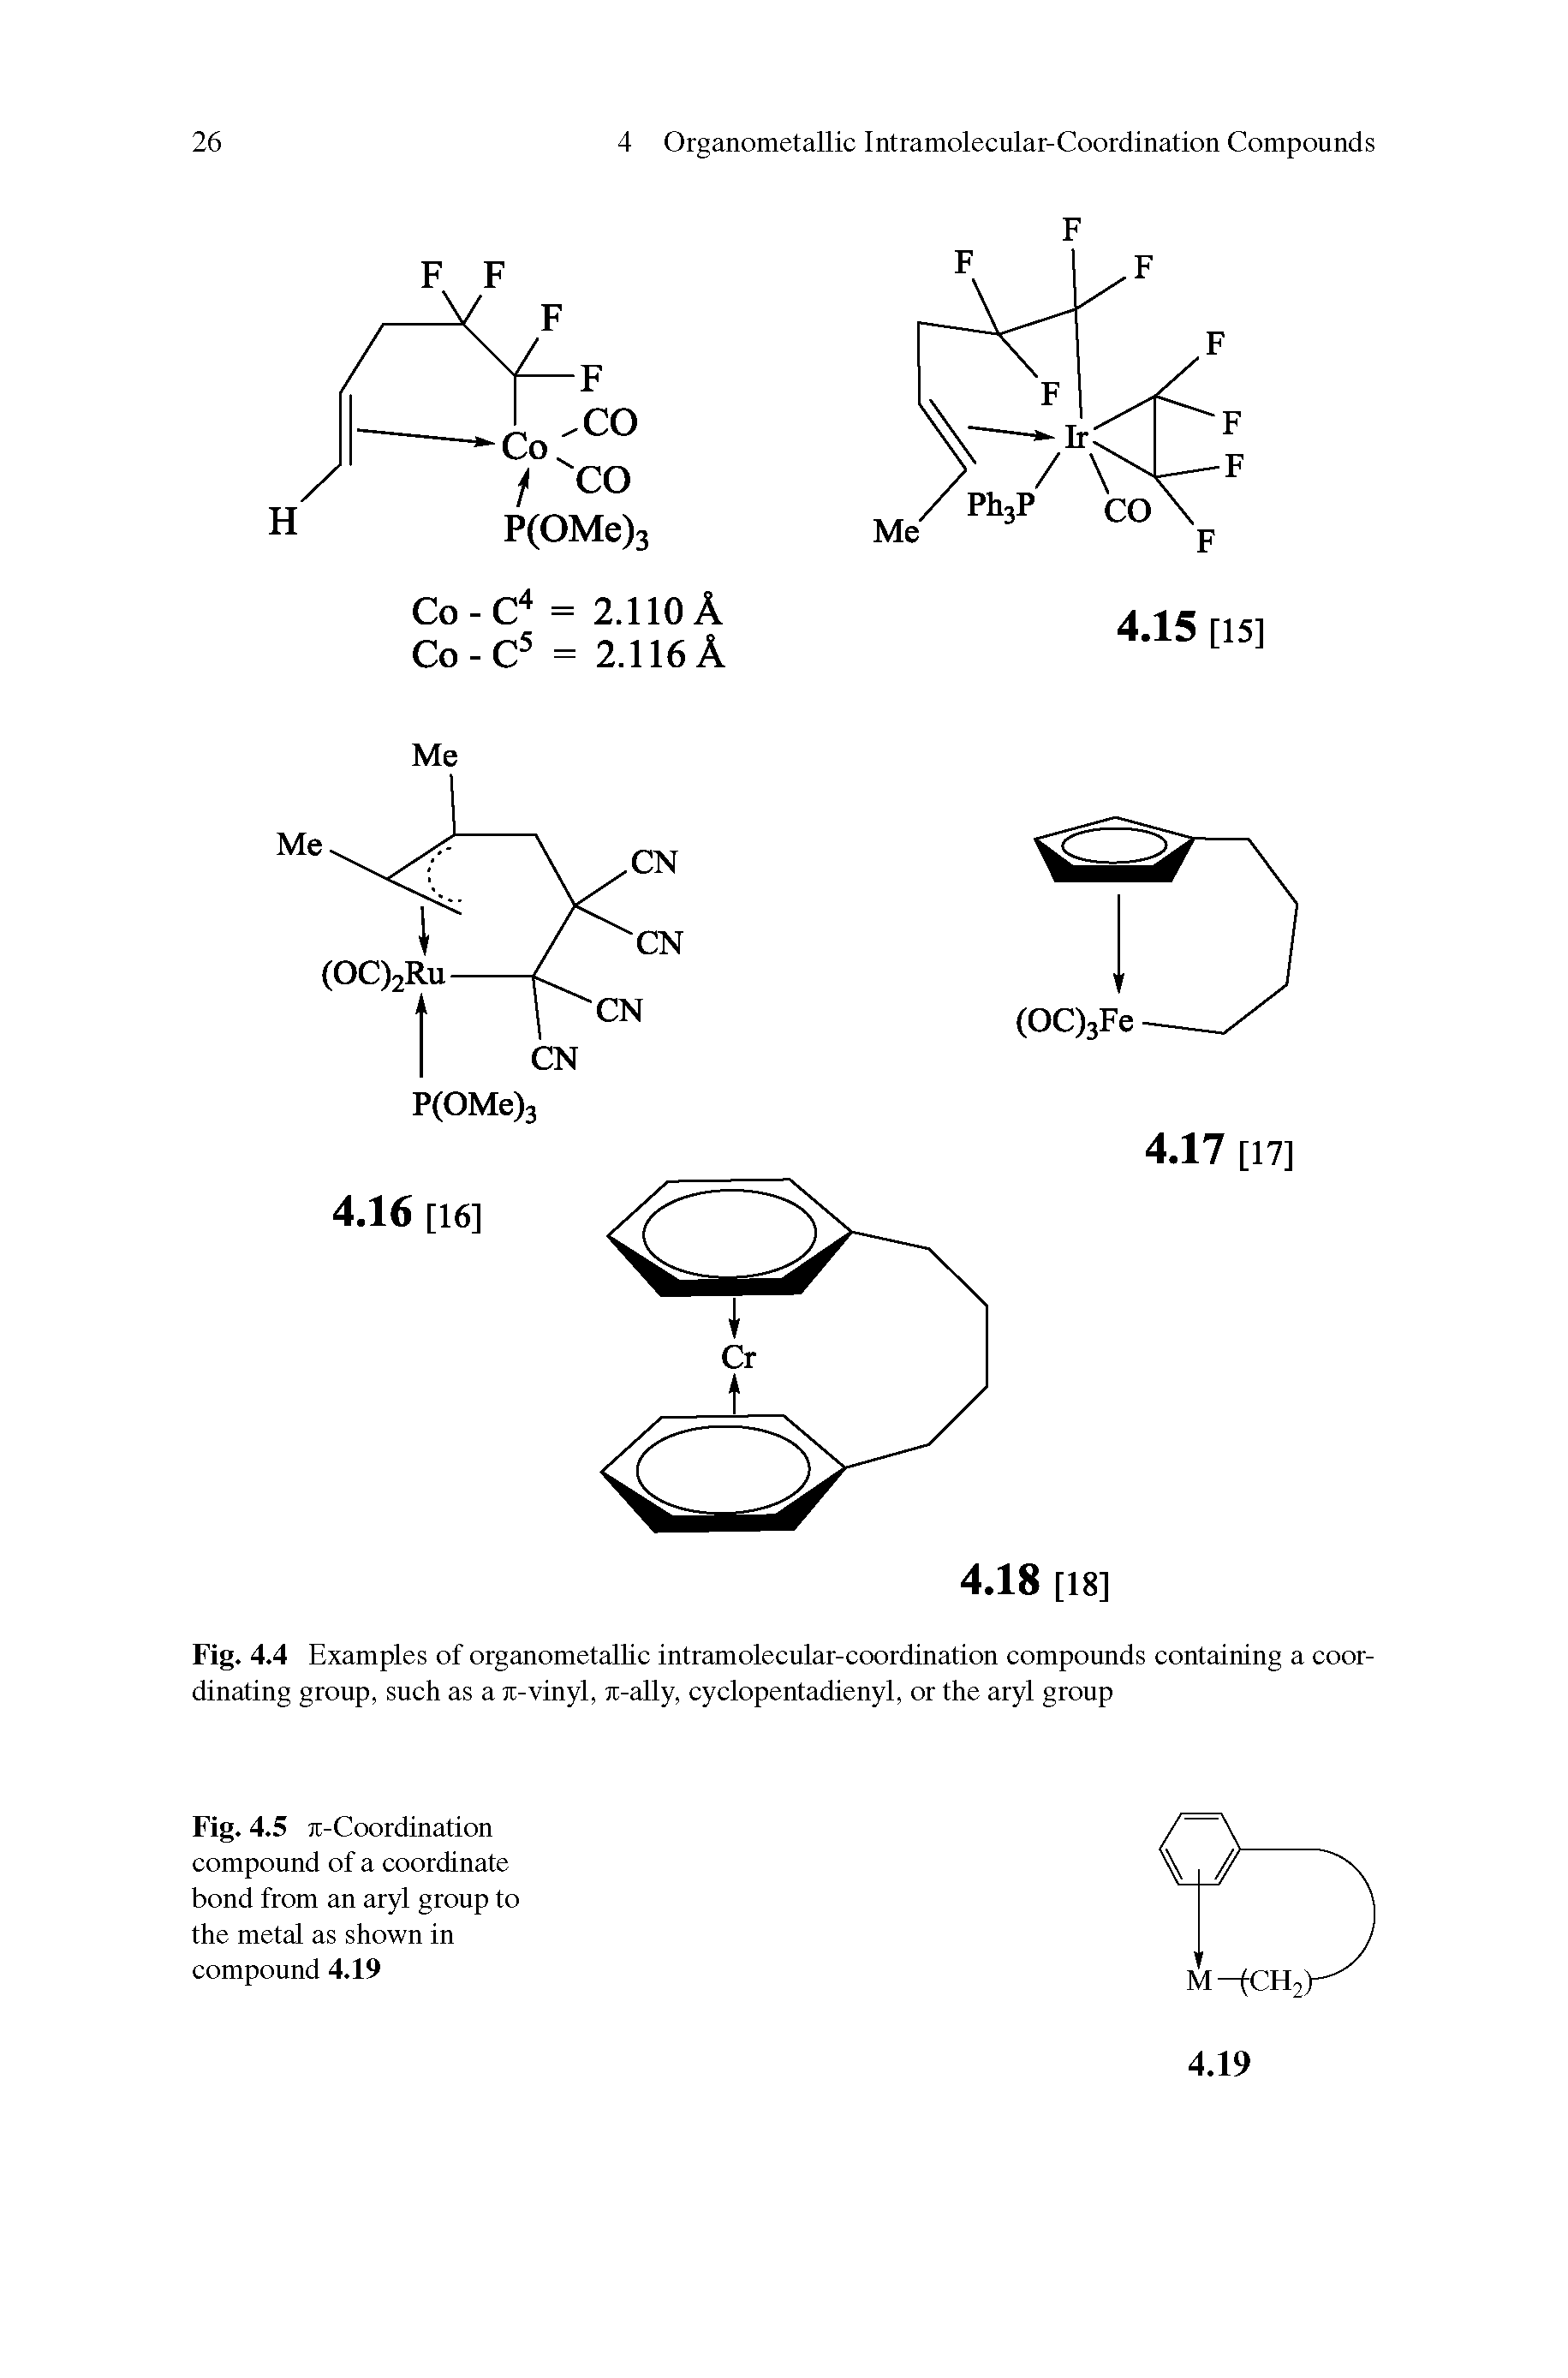 Fig. 4.4 Examples of organometallic intramolecular-coordination compounds containing a coordinating group, such as a Jt-vinyl, Jt-ally, cyclopentadienyl, or the aryl group...